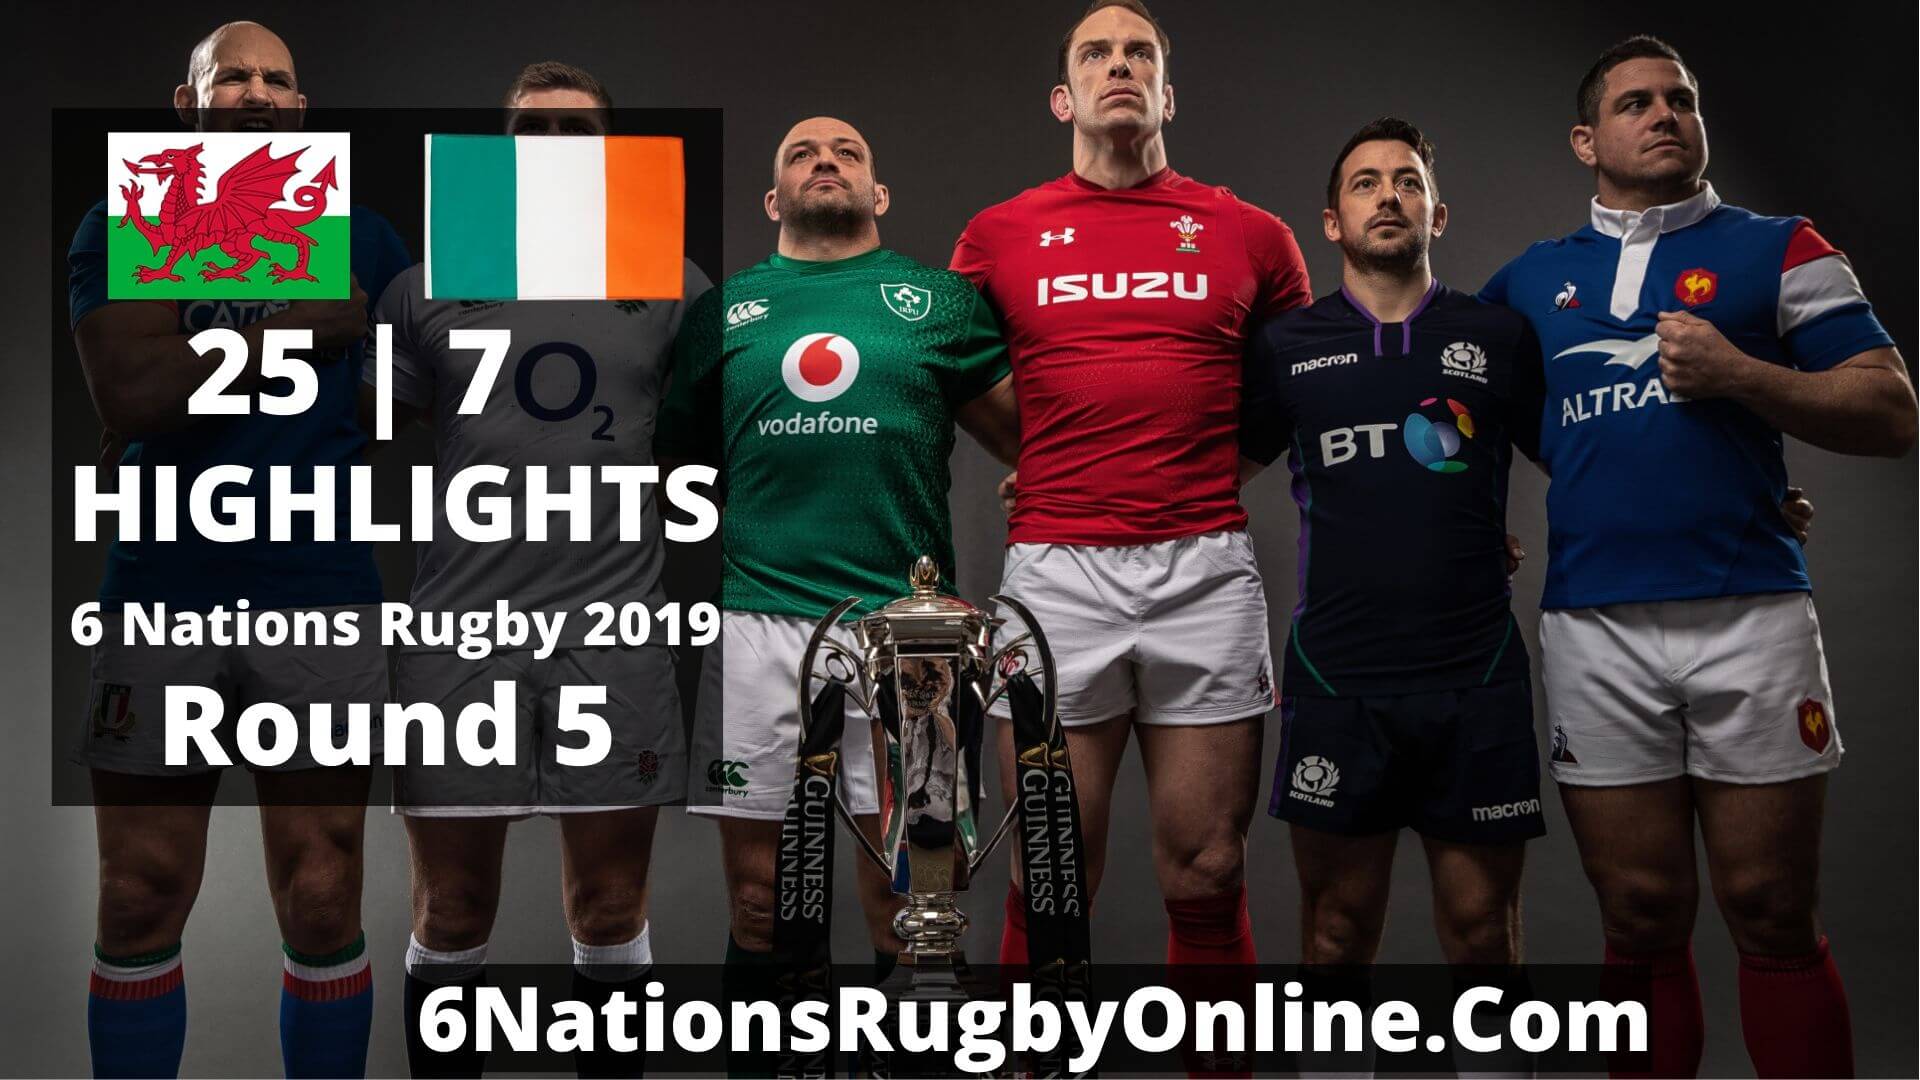 Wales Vs Ireland Highlights 2019 Six Nations Rugby Round 5